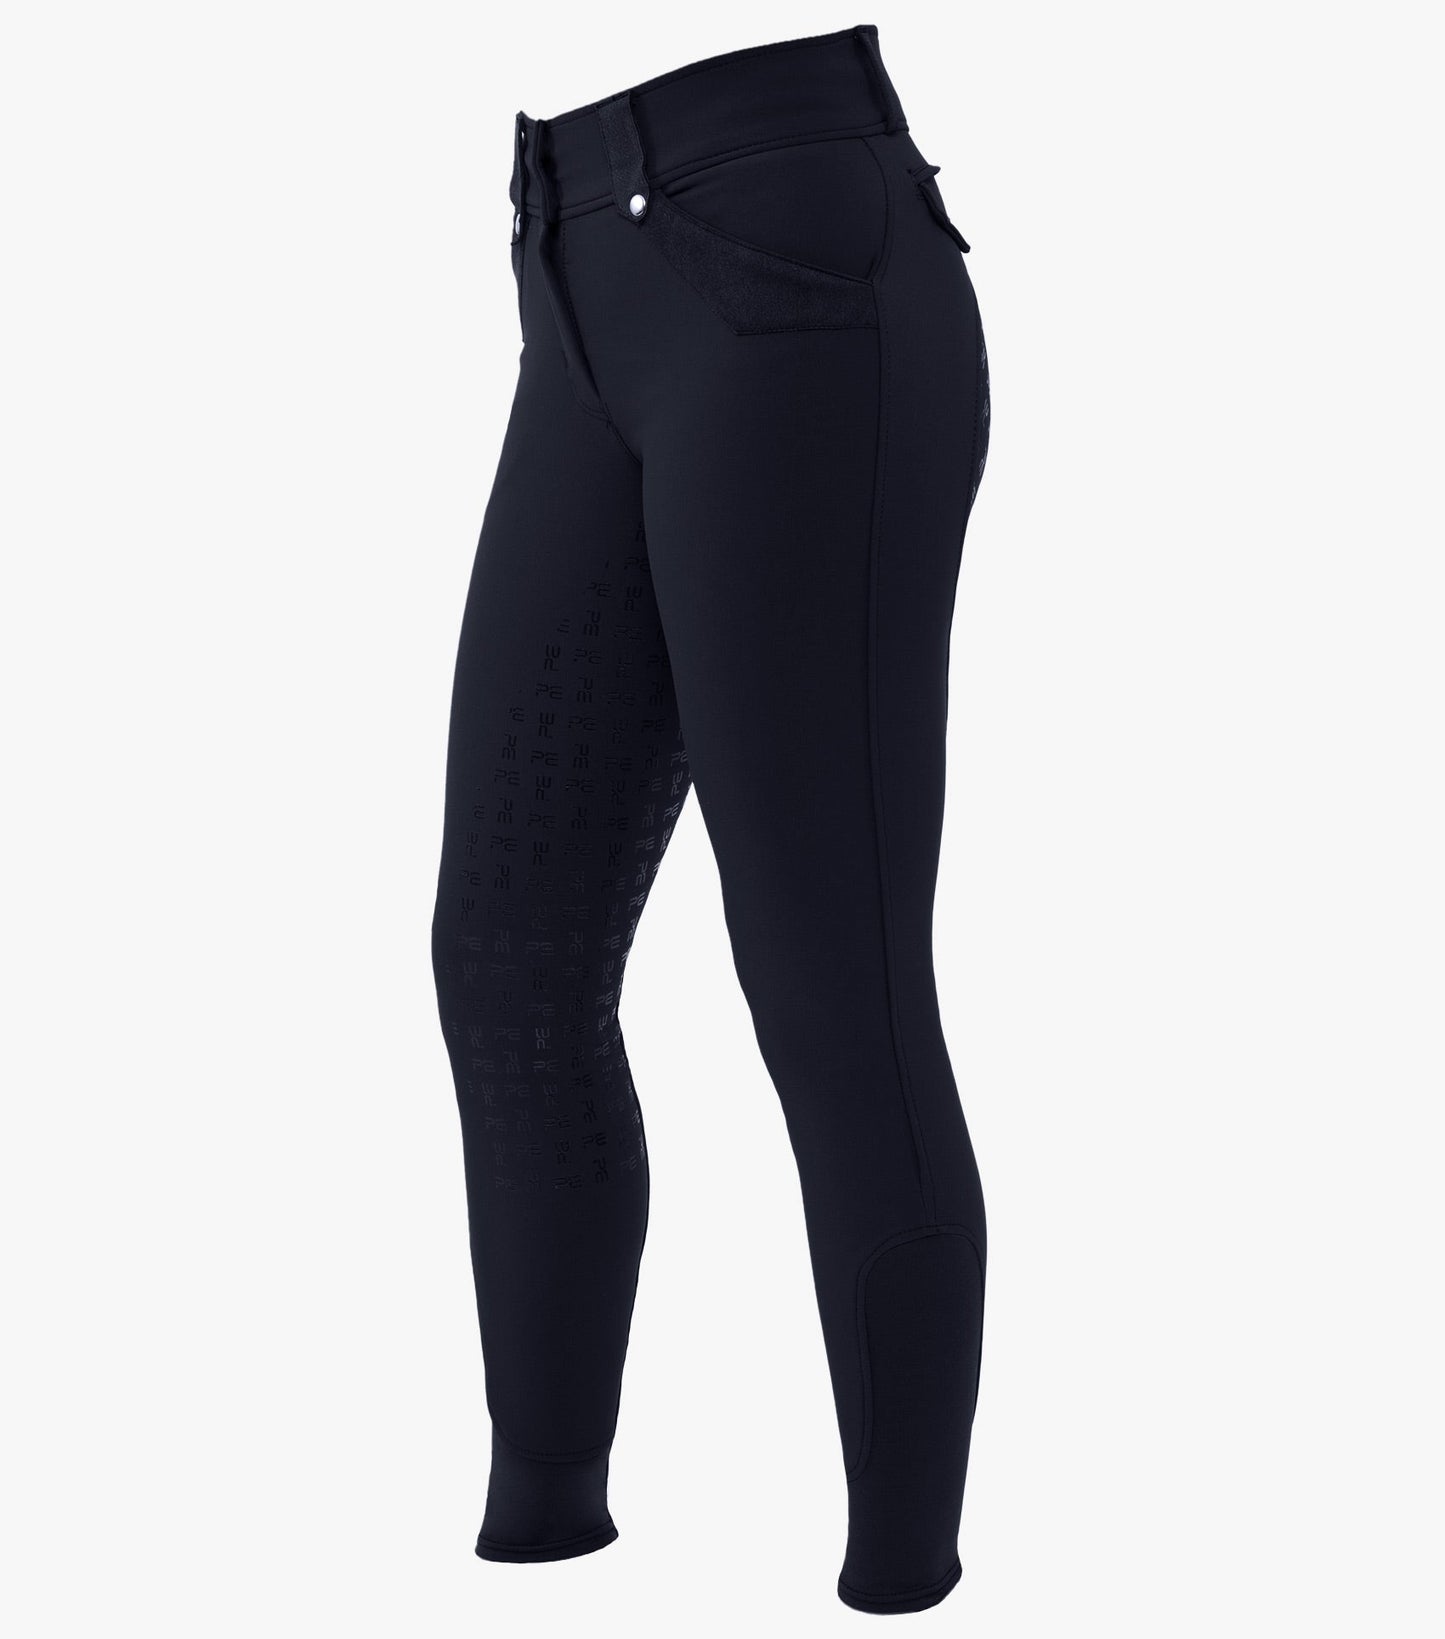 Premier Equine Torino Ladies Full Seat Gel Riding Breeches (high waisted, water repellant) - grey, navy, black